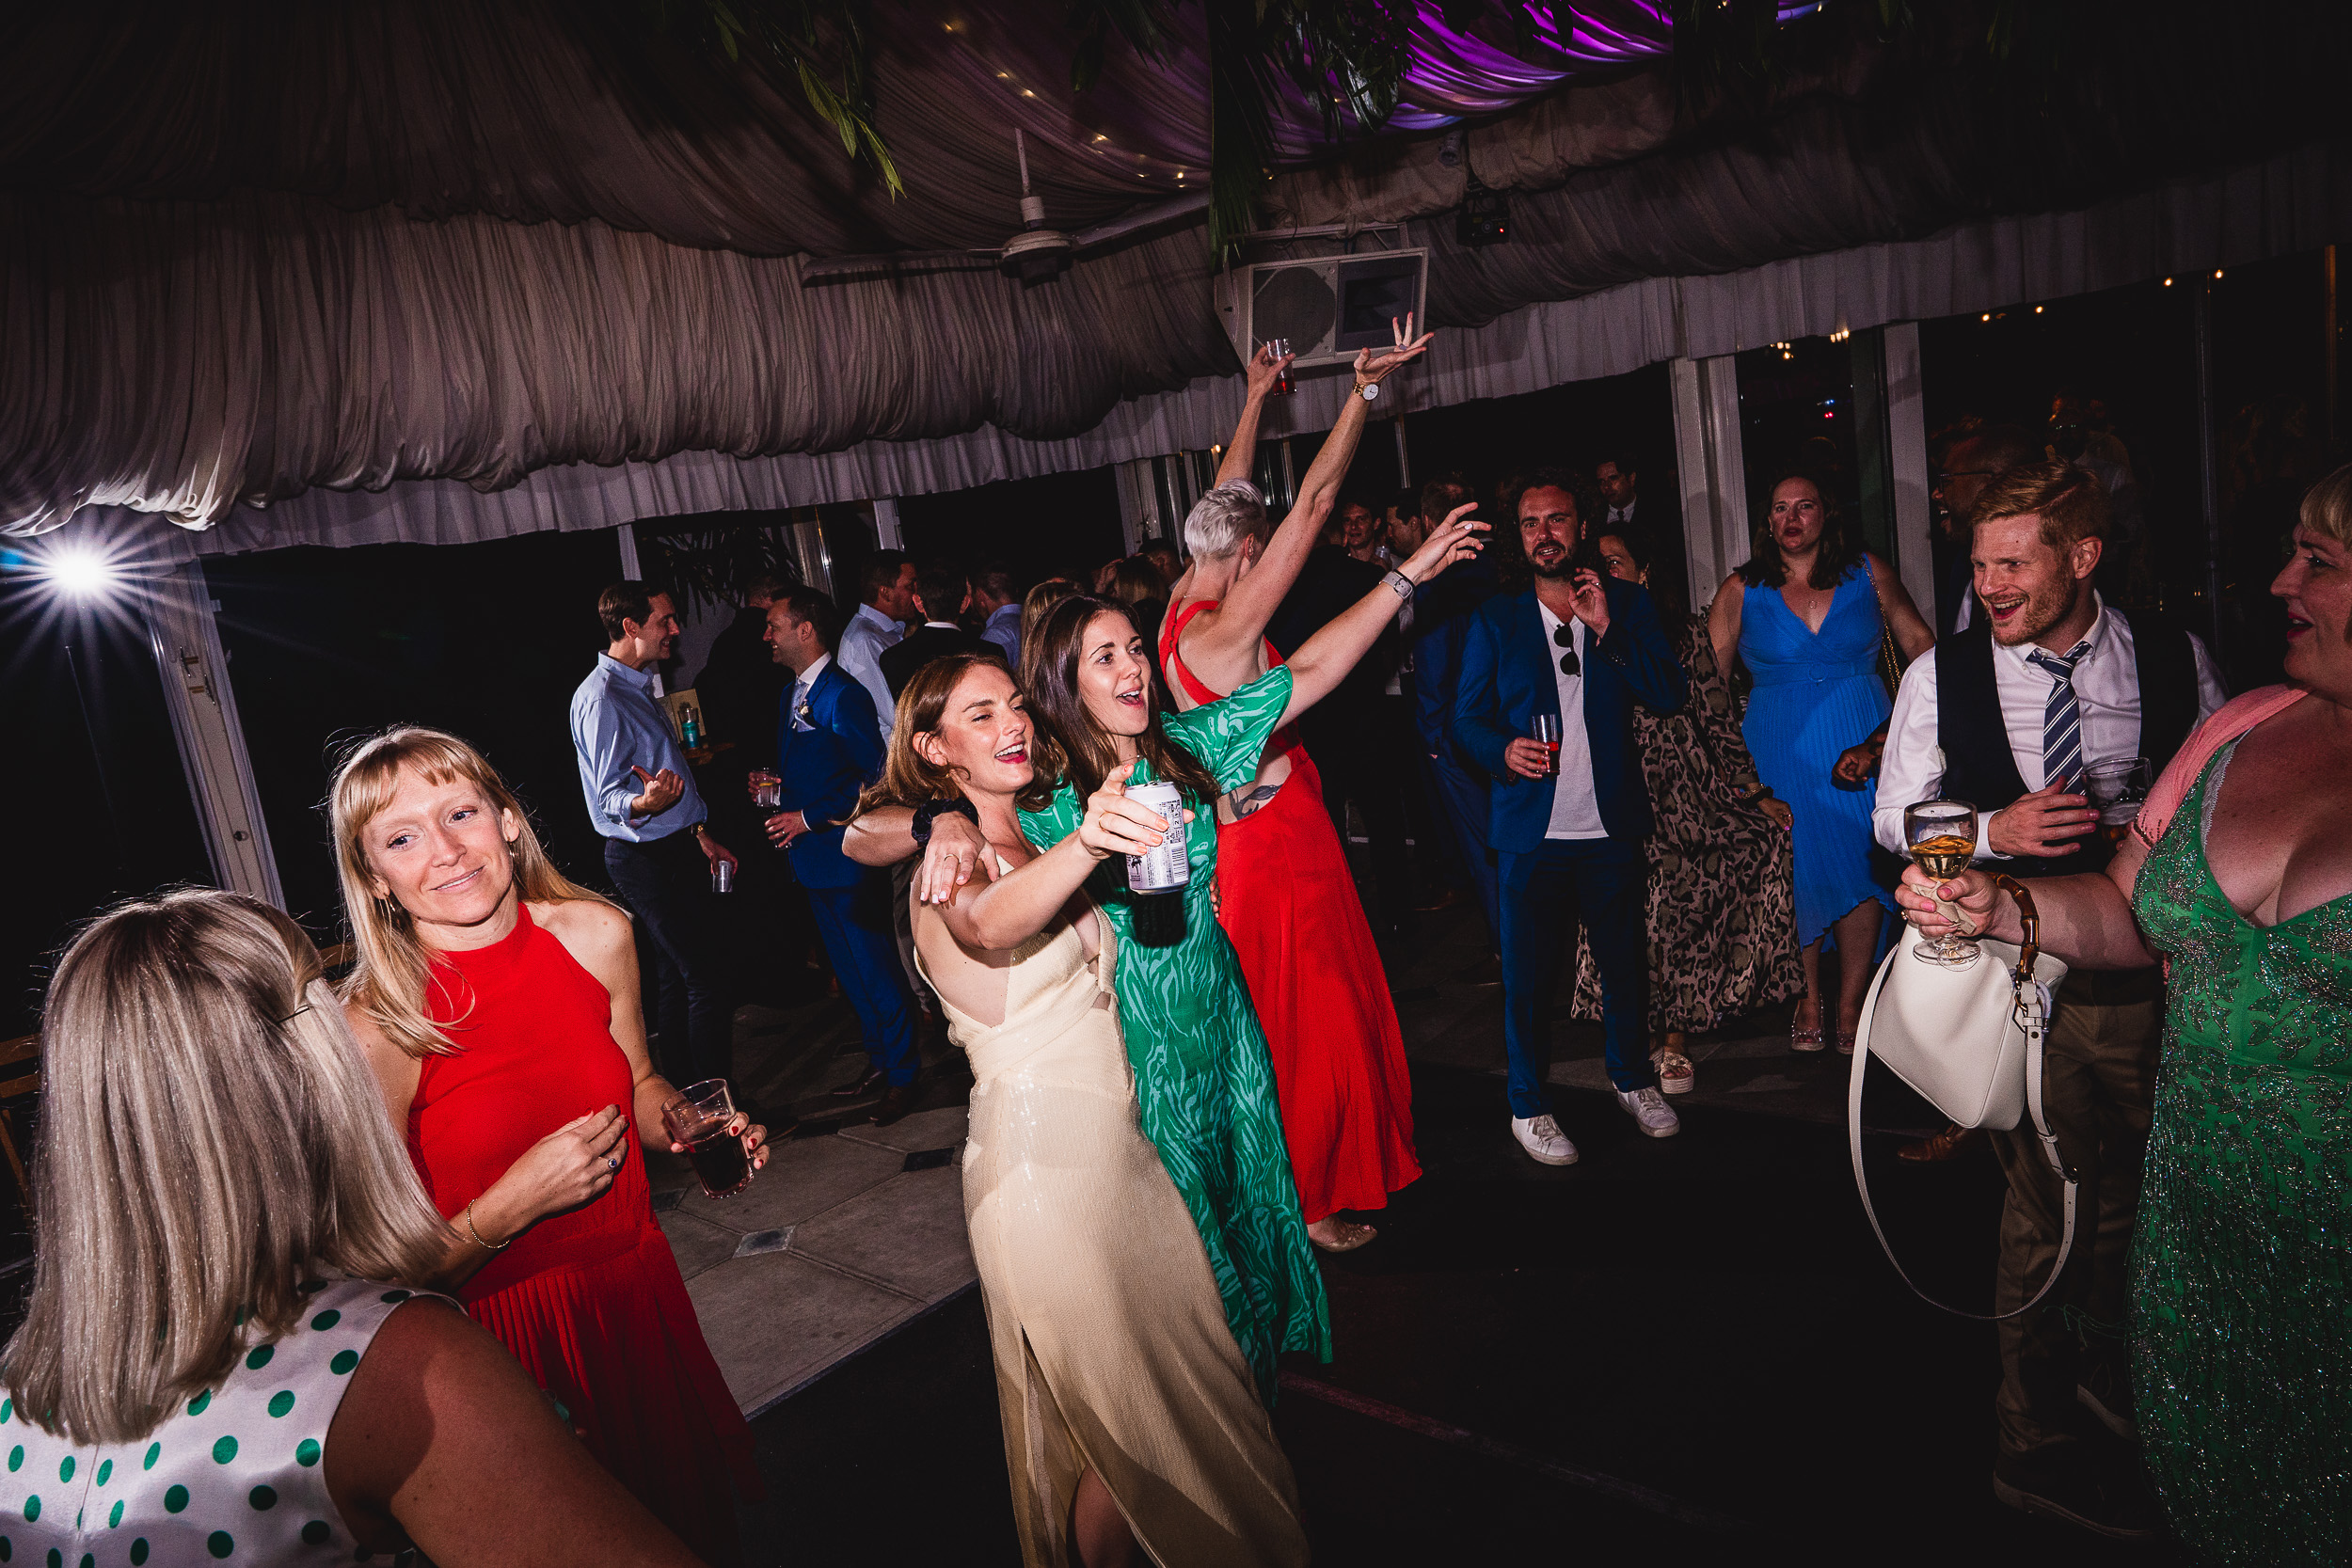 A group of people dancing at a Surrey wedding reception.